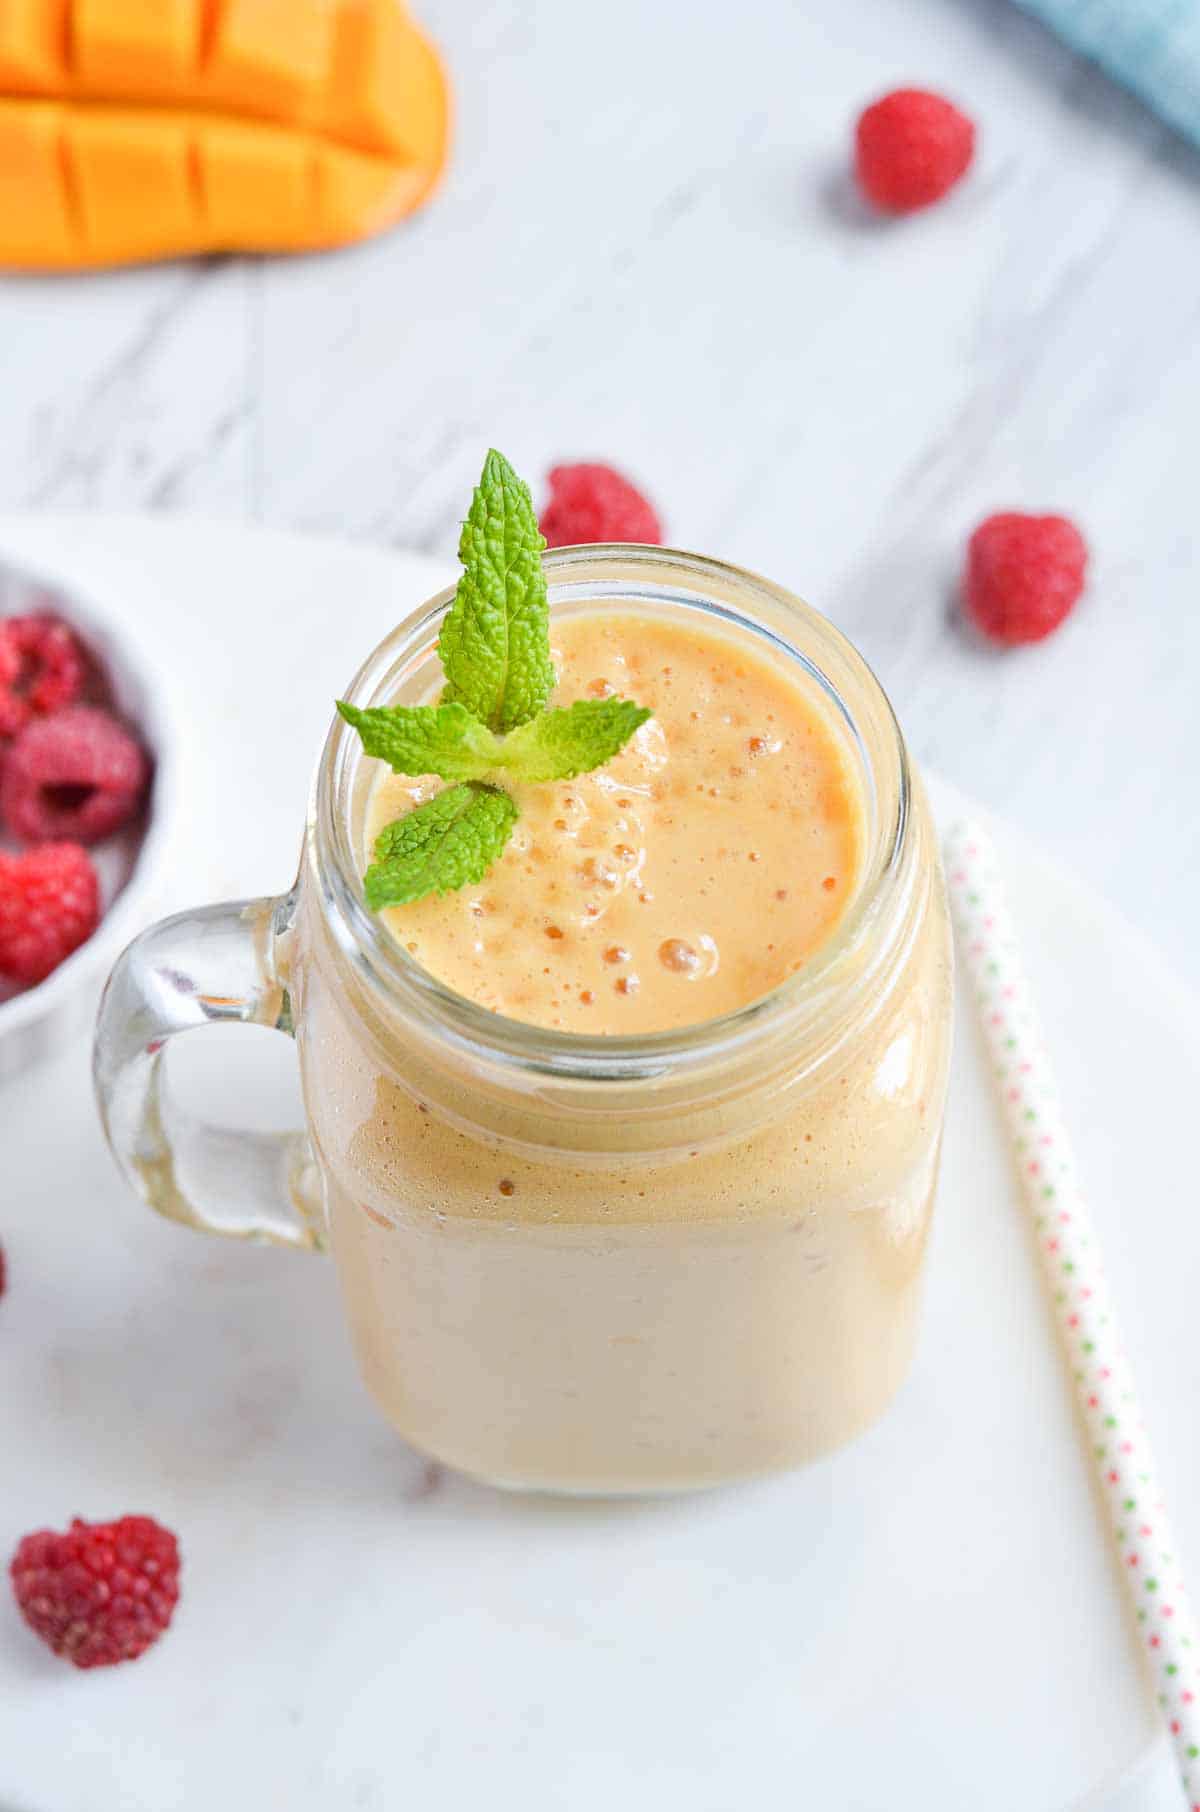 mango raspberry smoothie served in a glass jar with mint leaves.